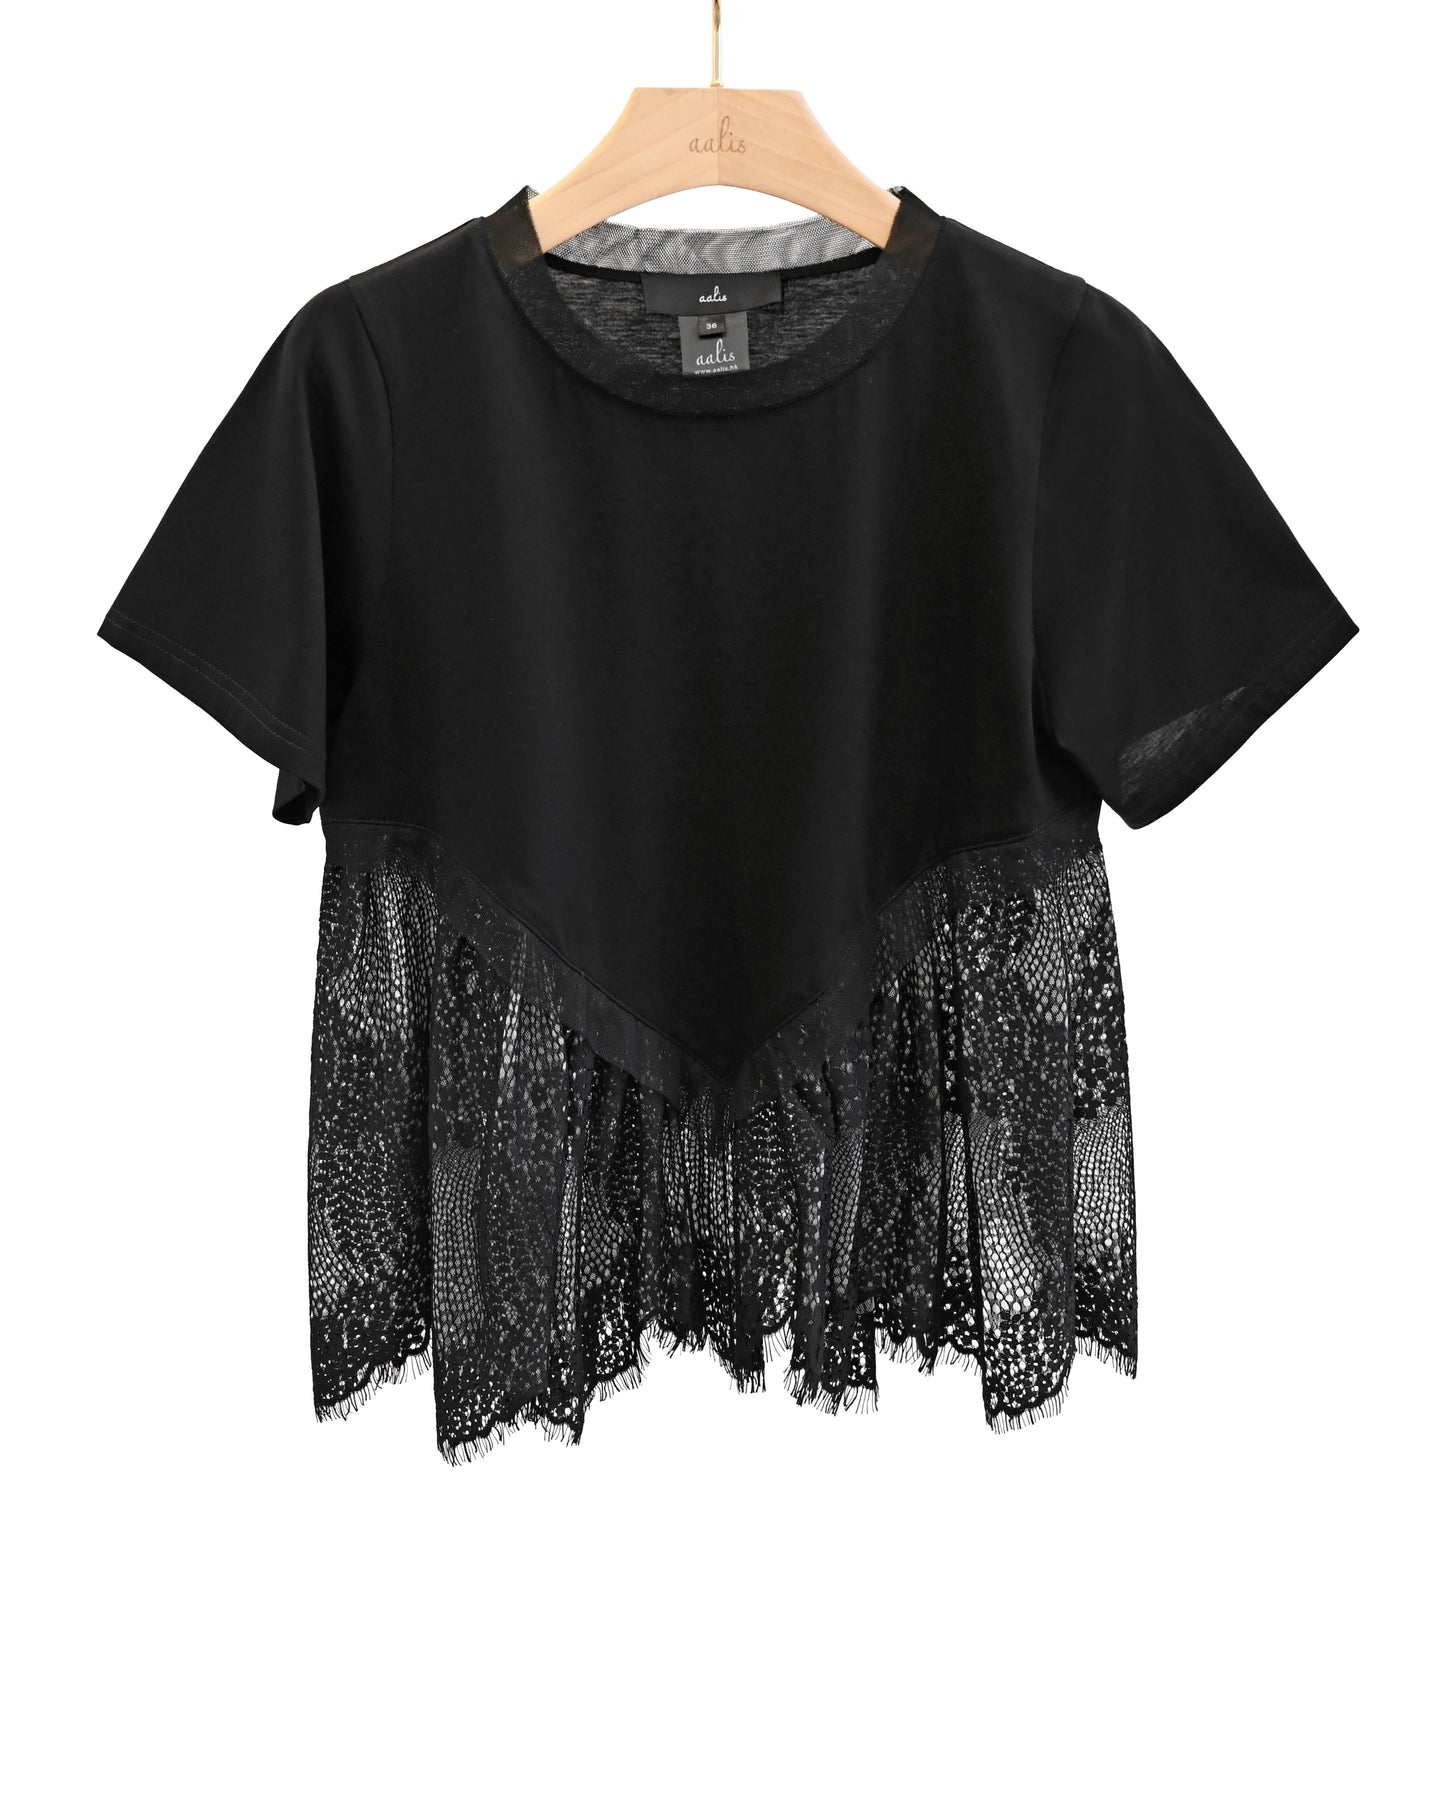 Load image into Gallery viewer, aalis MILLIE v shape lace panel Tee (Black)
